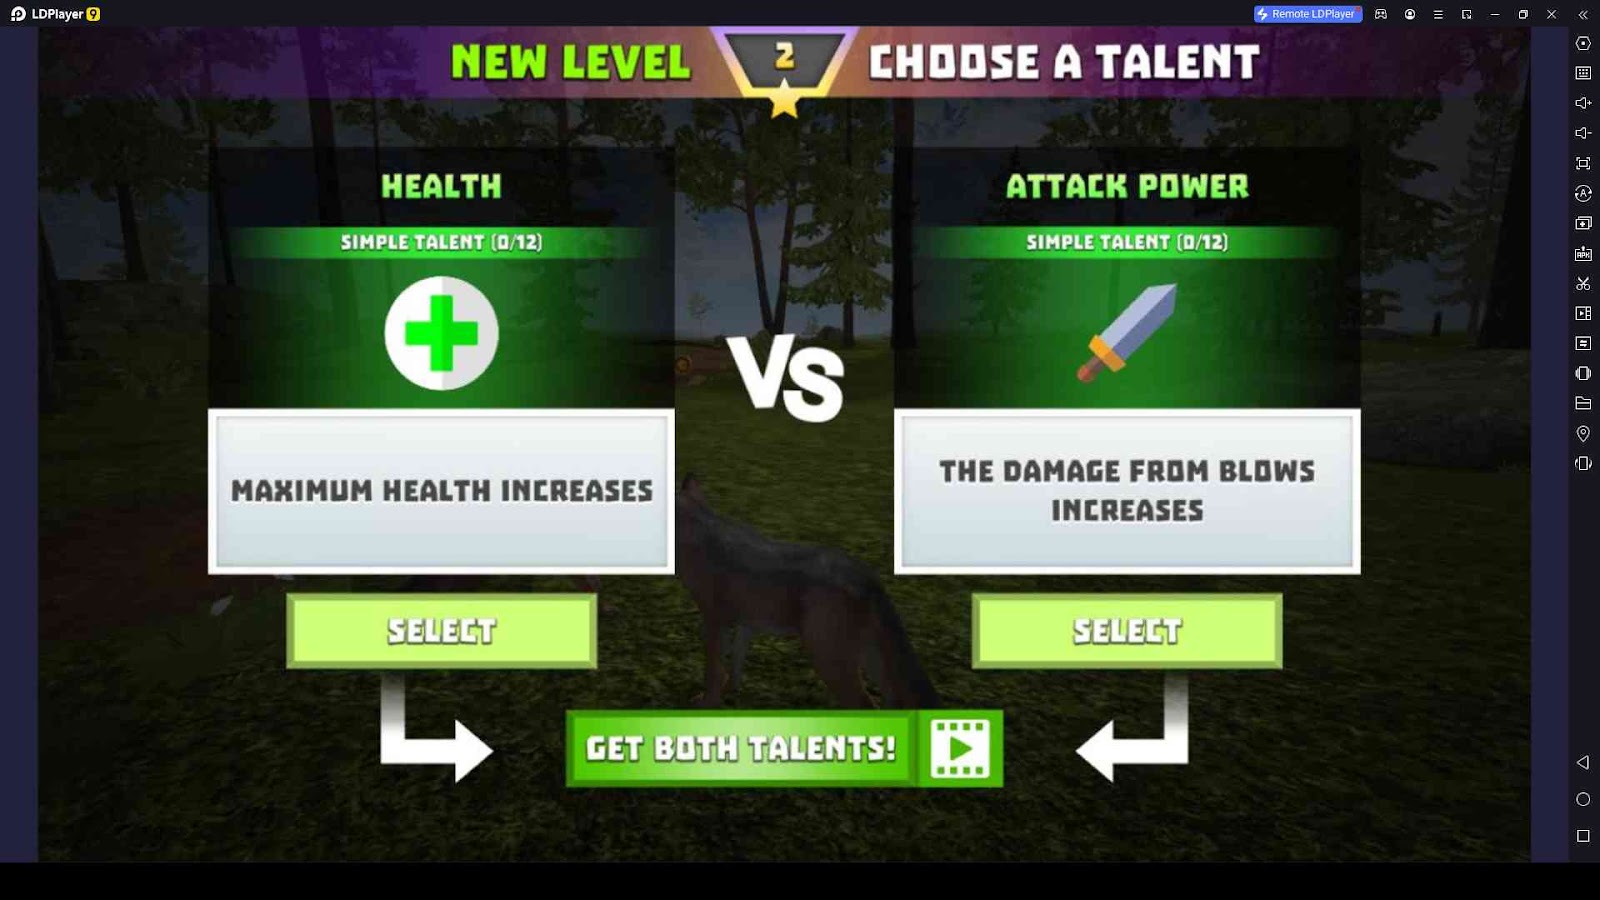 Choose Better Talents to Power Up Yourself